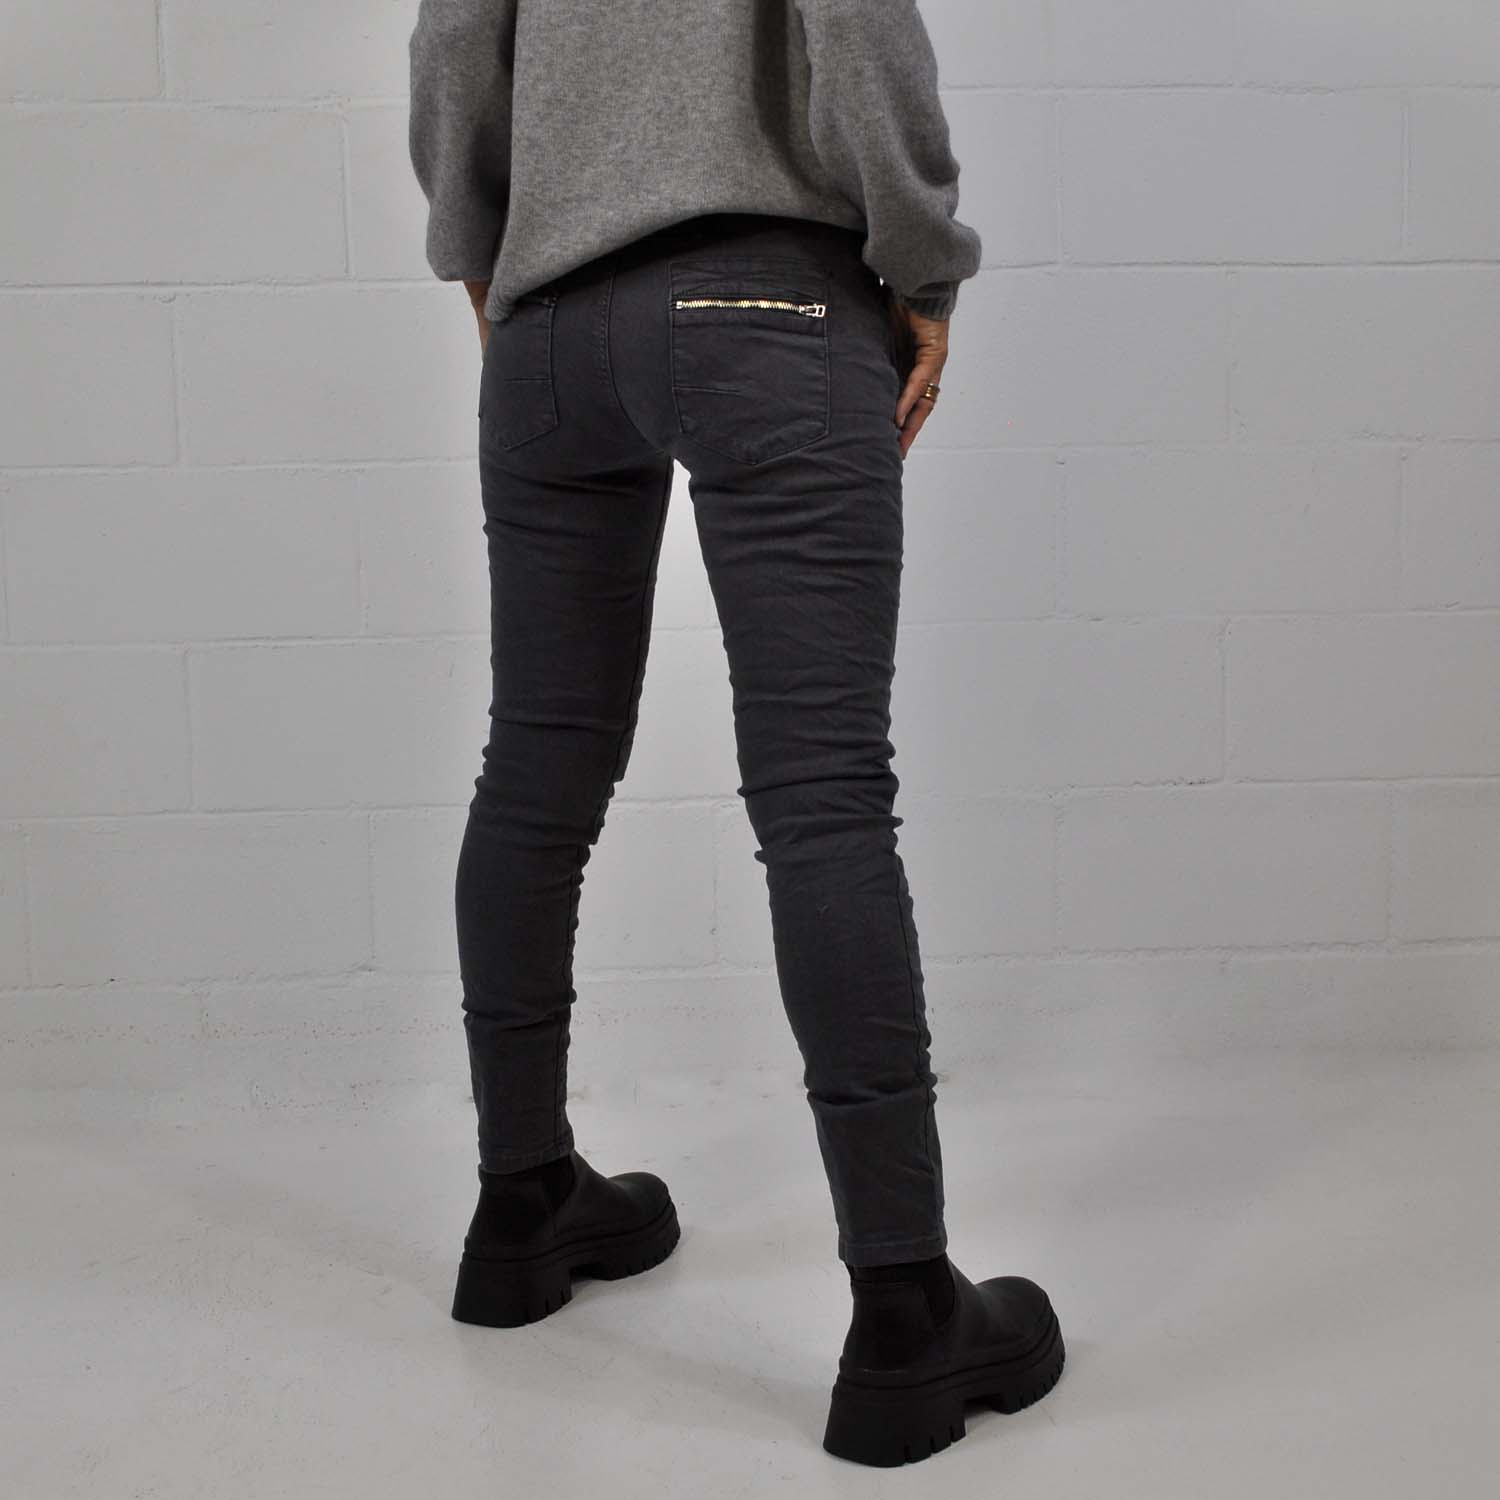 Gray zip and buttons pants